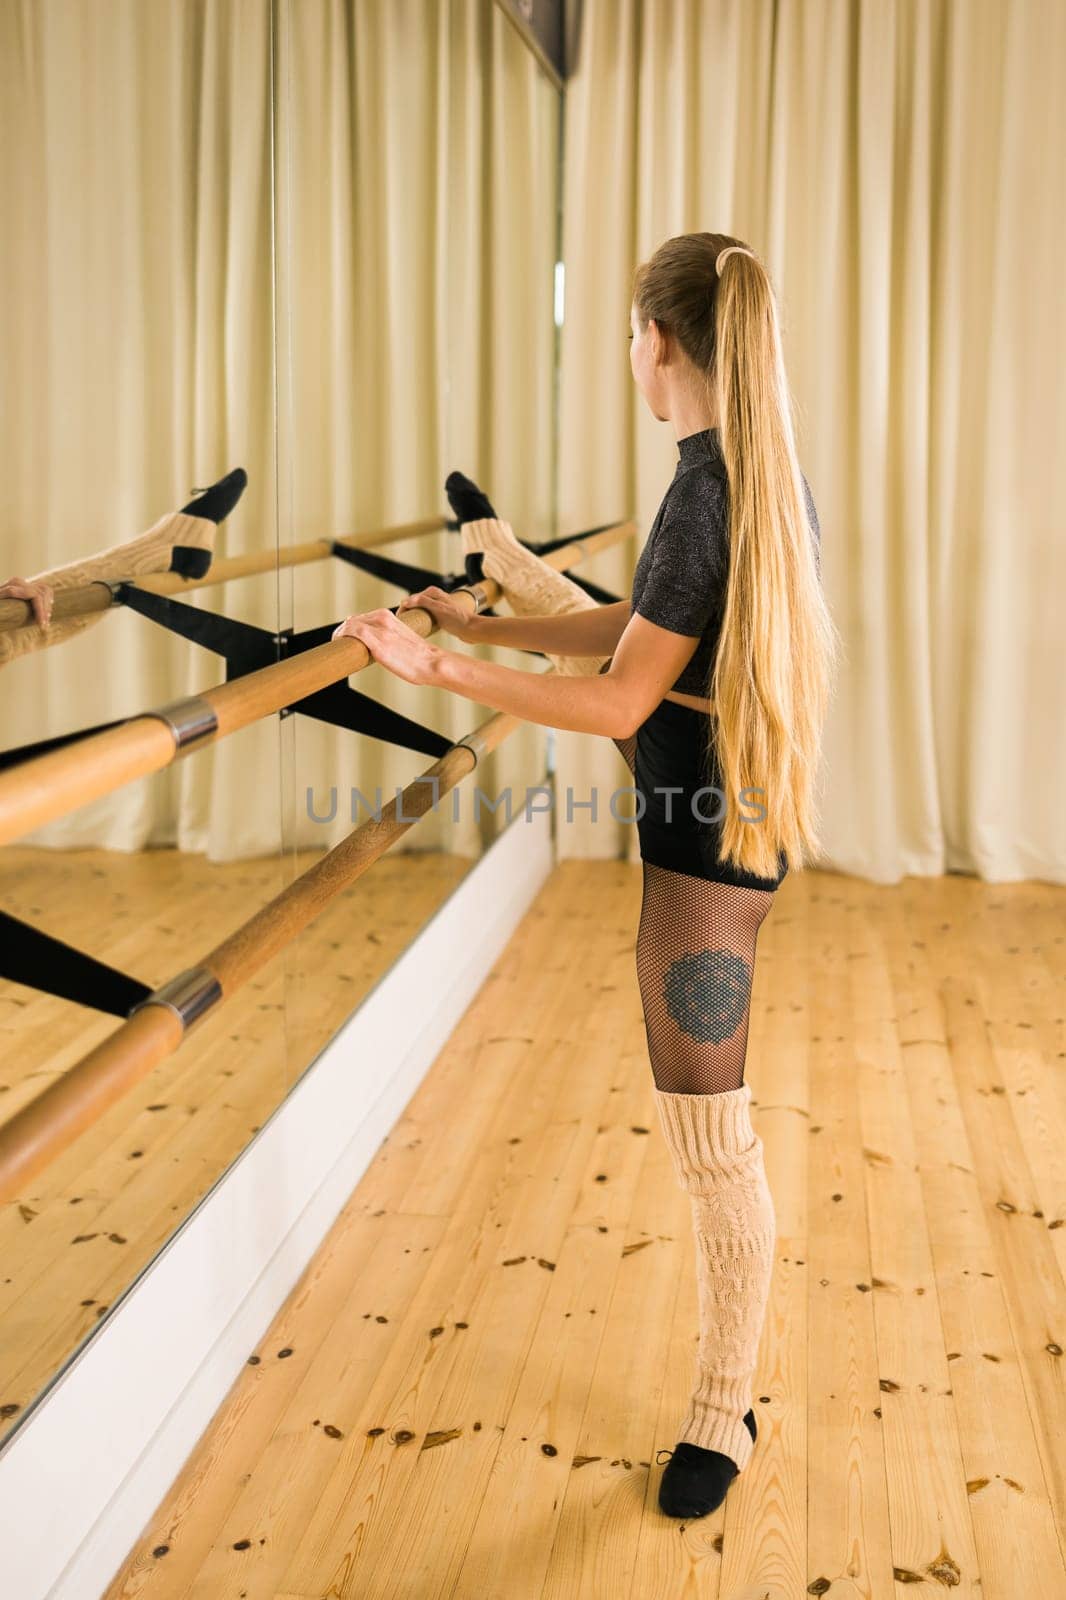 Young woman ballerina stretching and training at barre in dance studio - ballet and dancer concept by Satura86